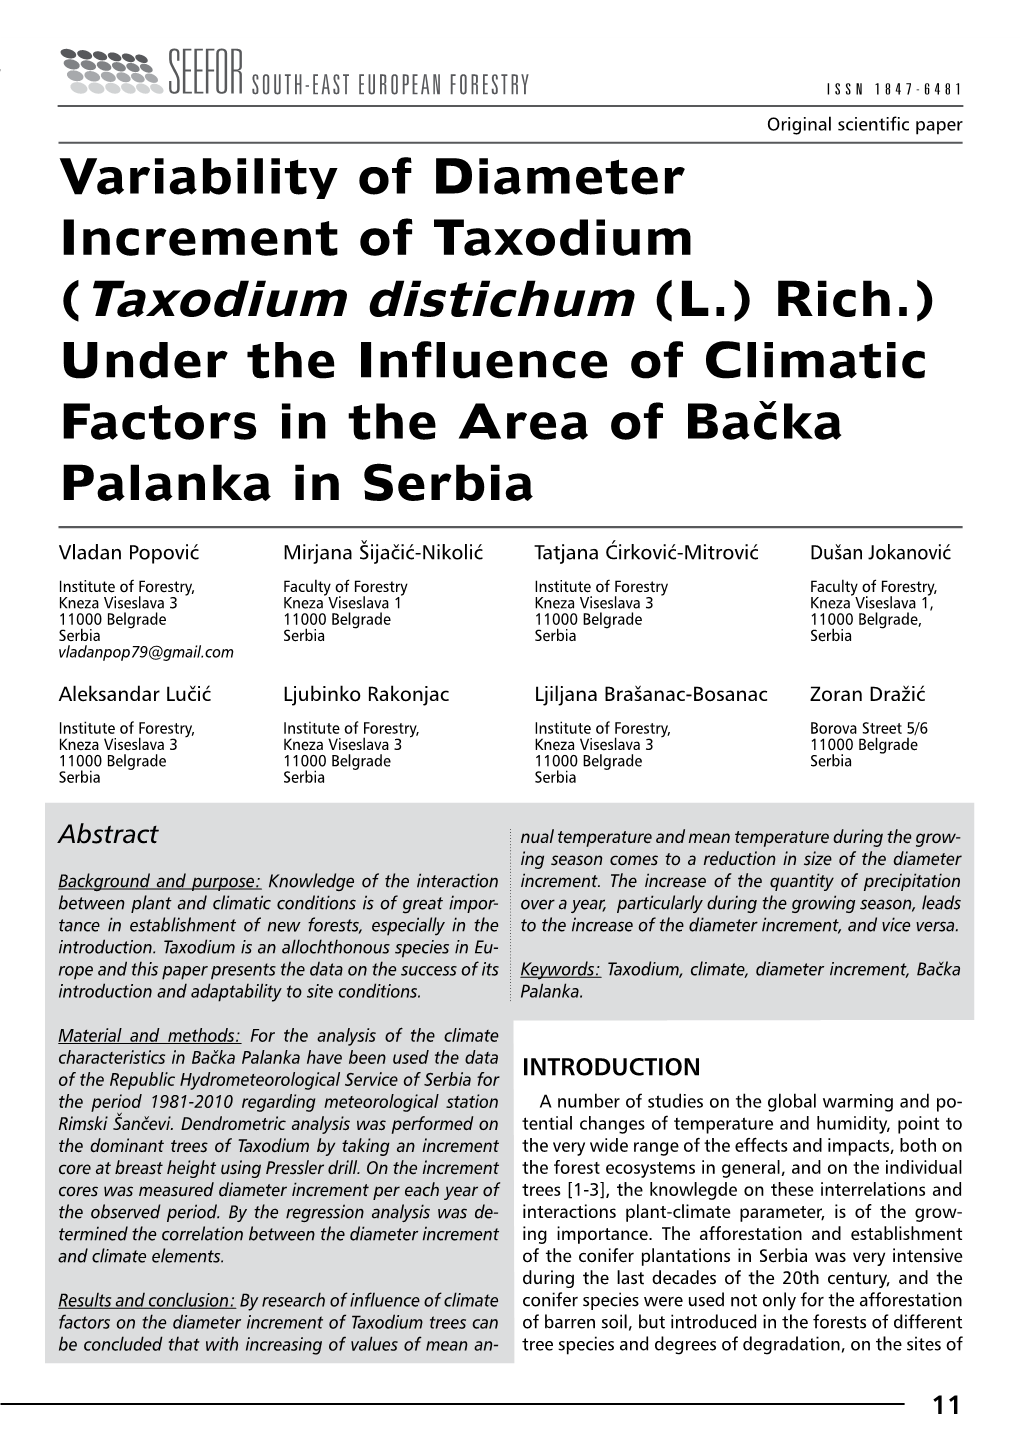 (Taxodium Distichum (L.) Rich.) Under the Influence of Climatic Factors in the Area of Bačka Palanka in Serbia